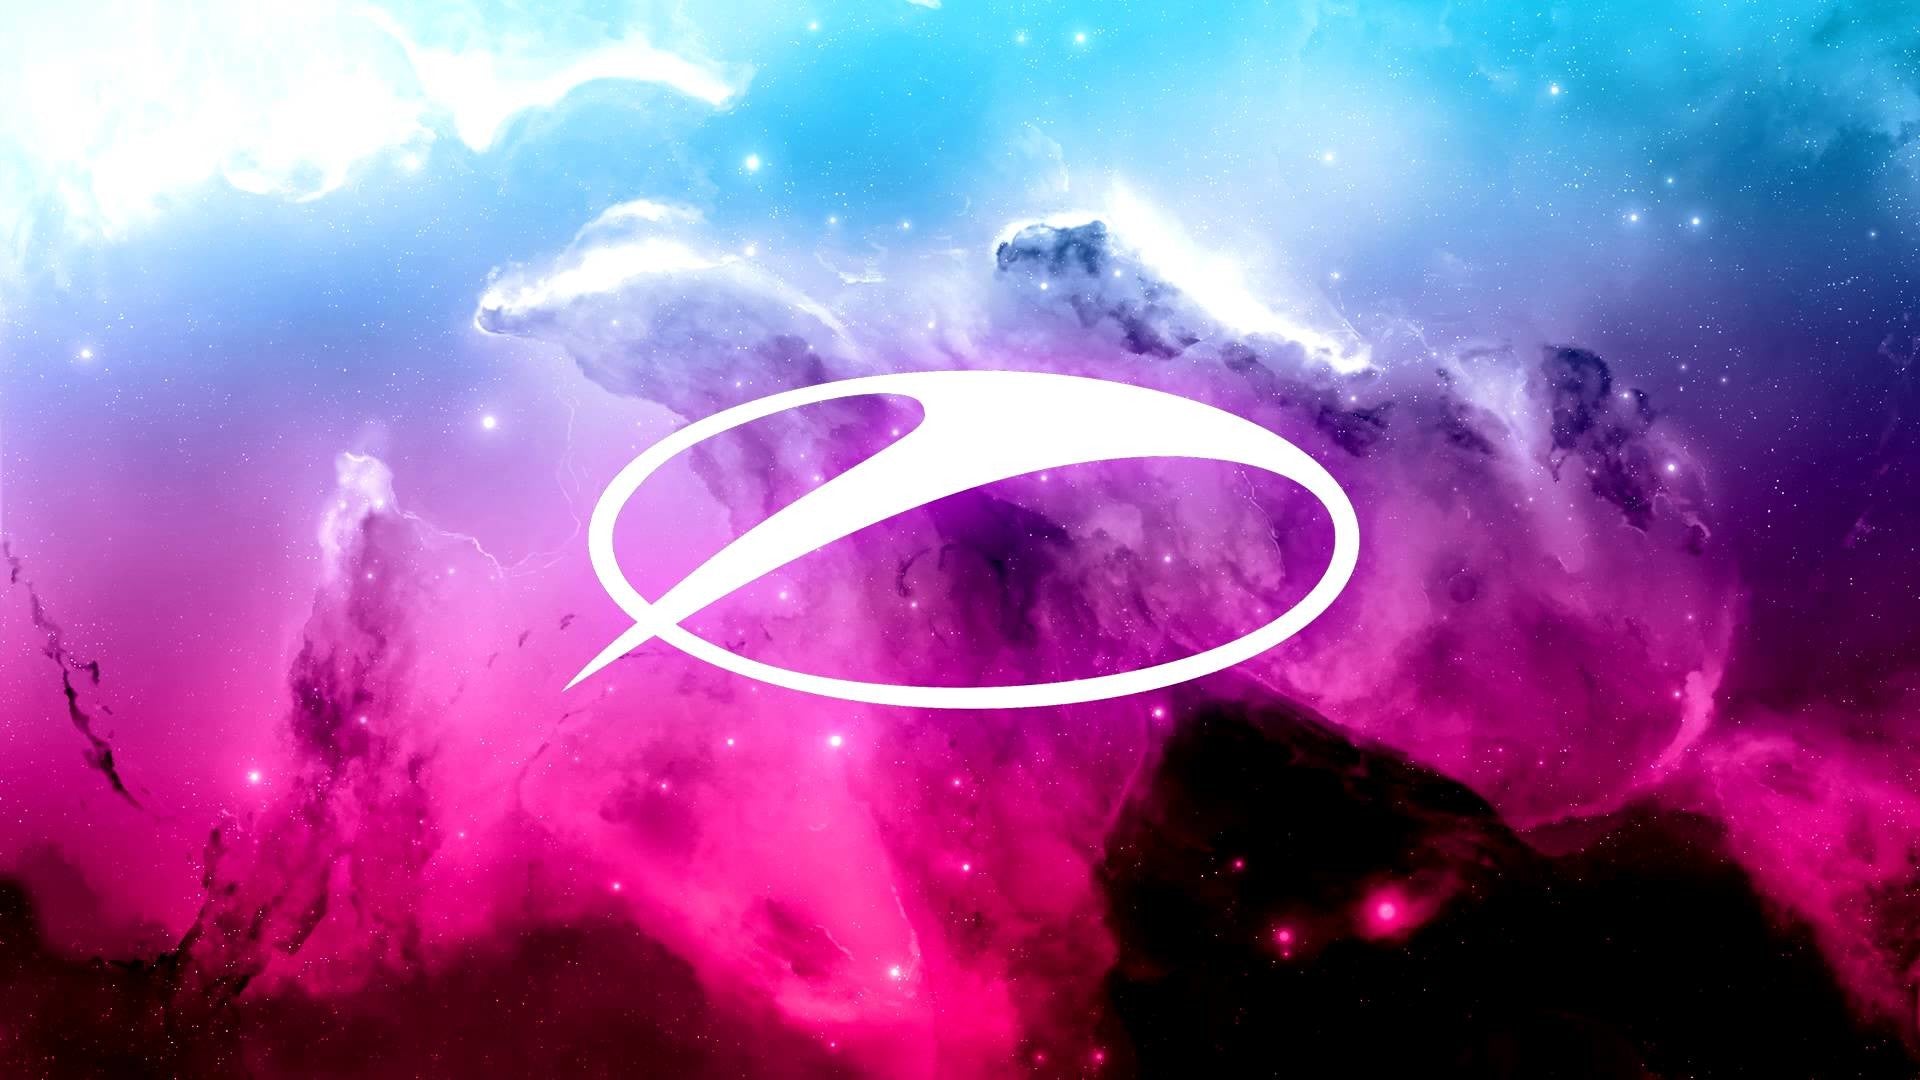 Complete Armin Van Buuren Yearly A State of Trance ASOT Shows DJ-Sets Compilation (2001)